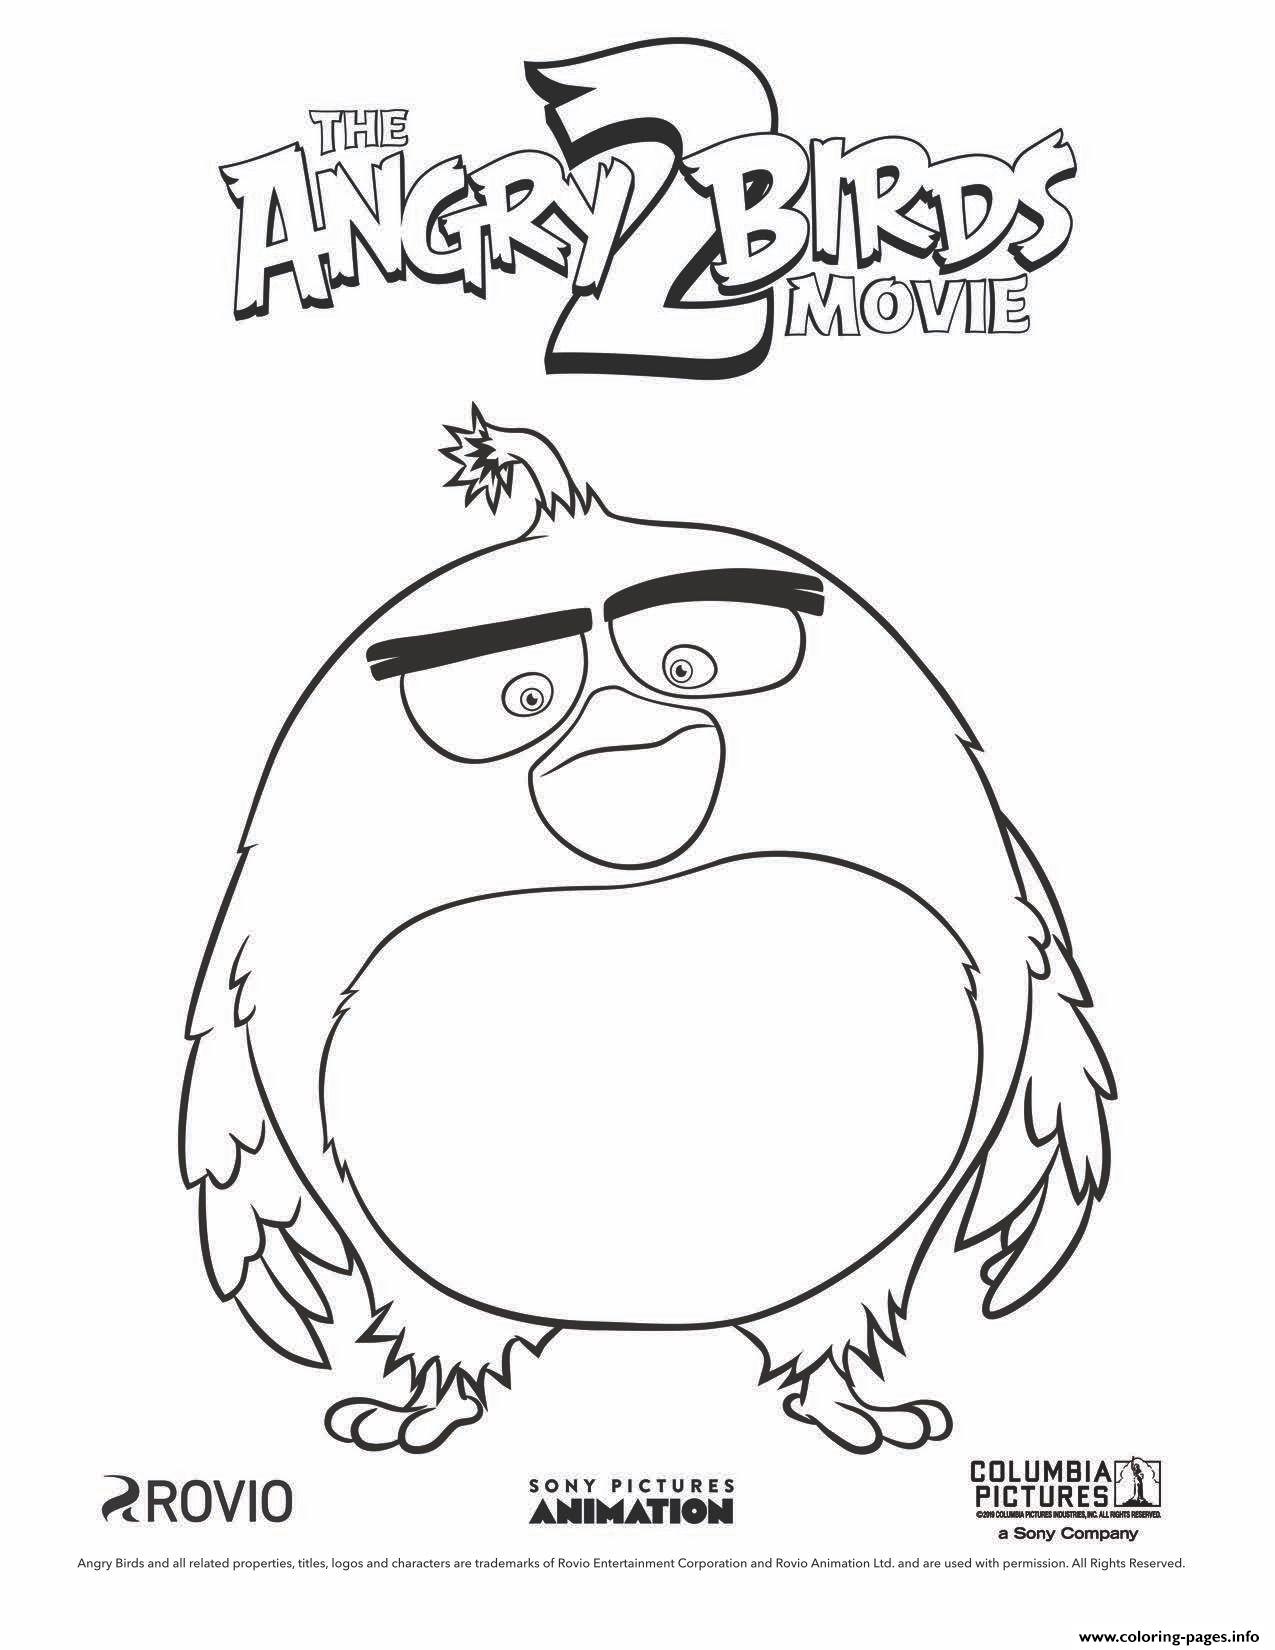 Big Black Bird Bomb From Angry Birds Movie 2 coloring